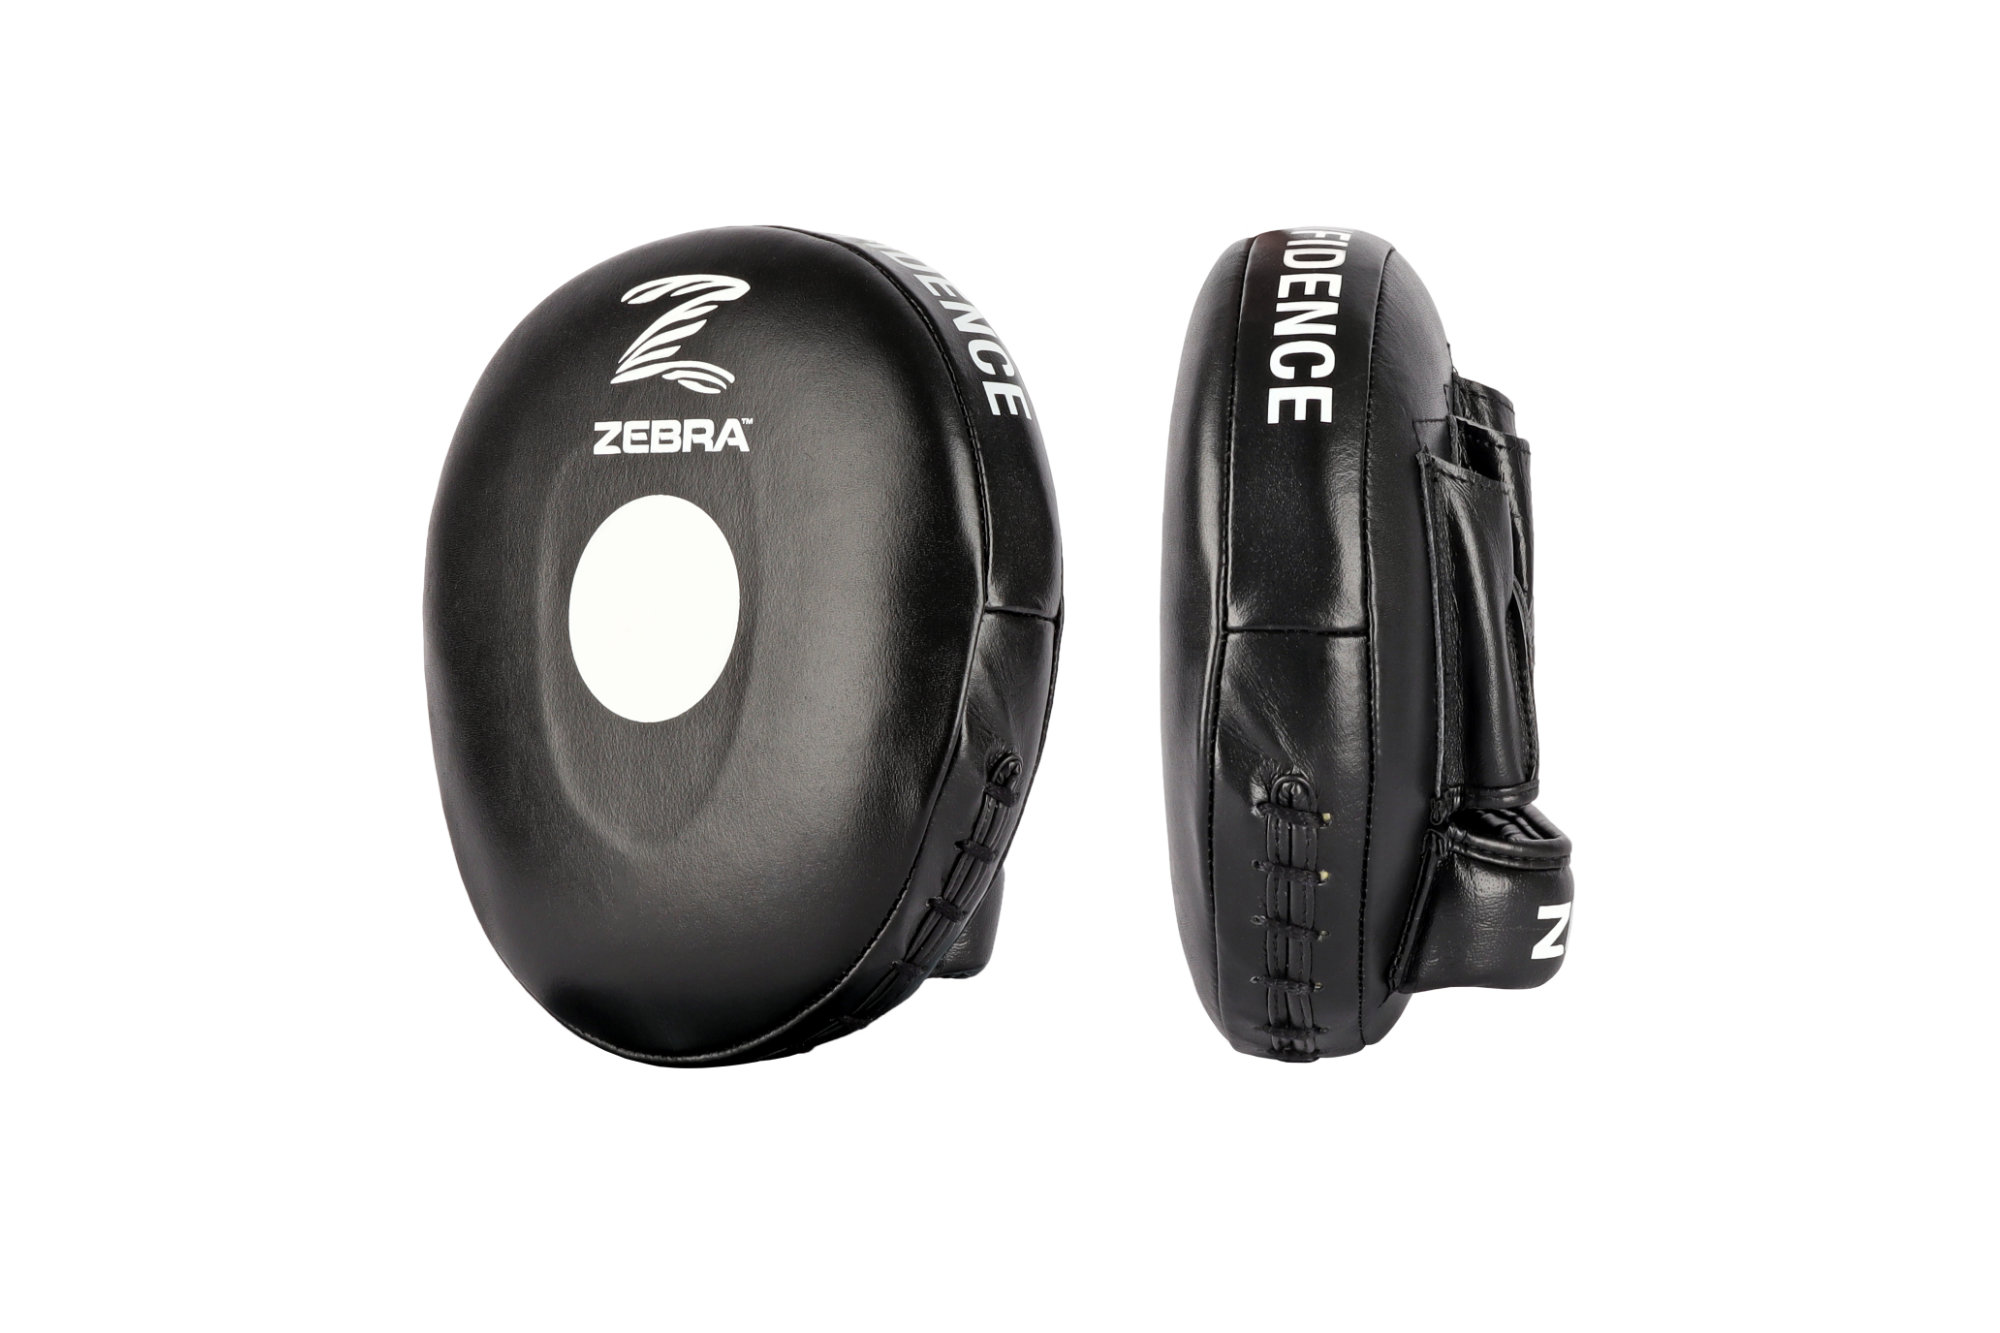 ZEBRA Pro coaching mitts front and side images